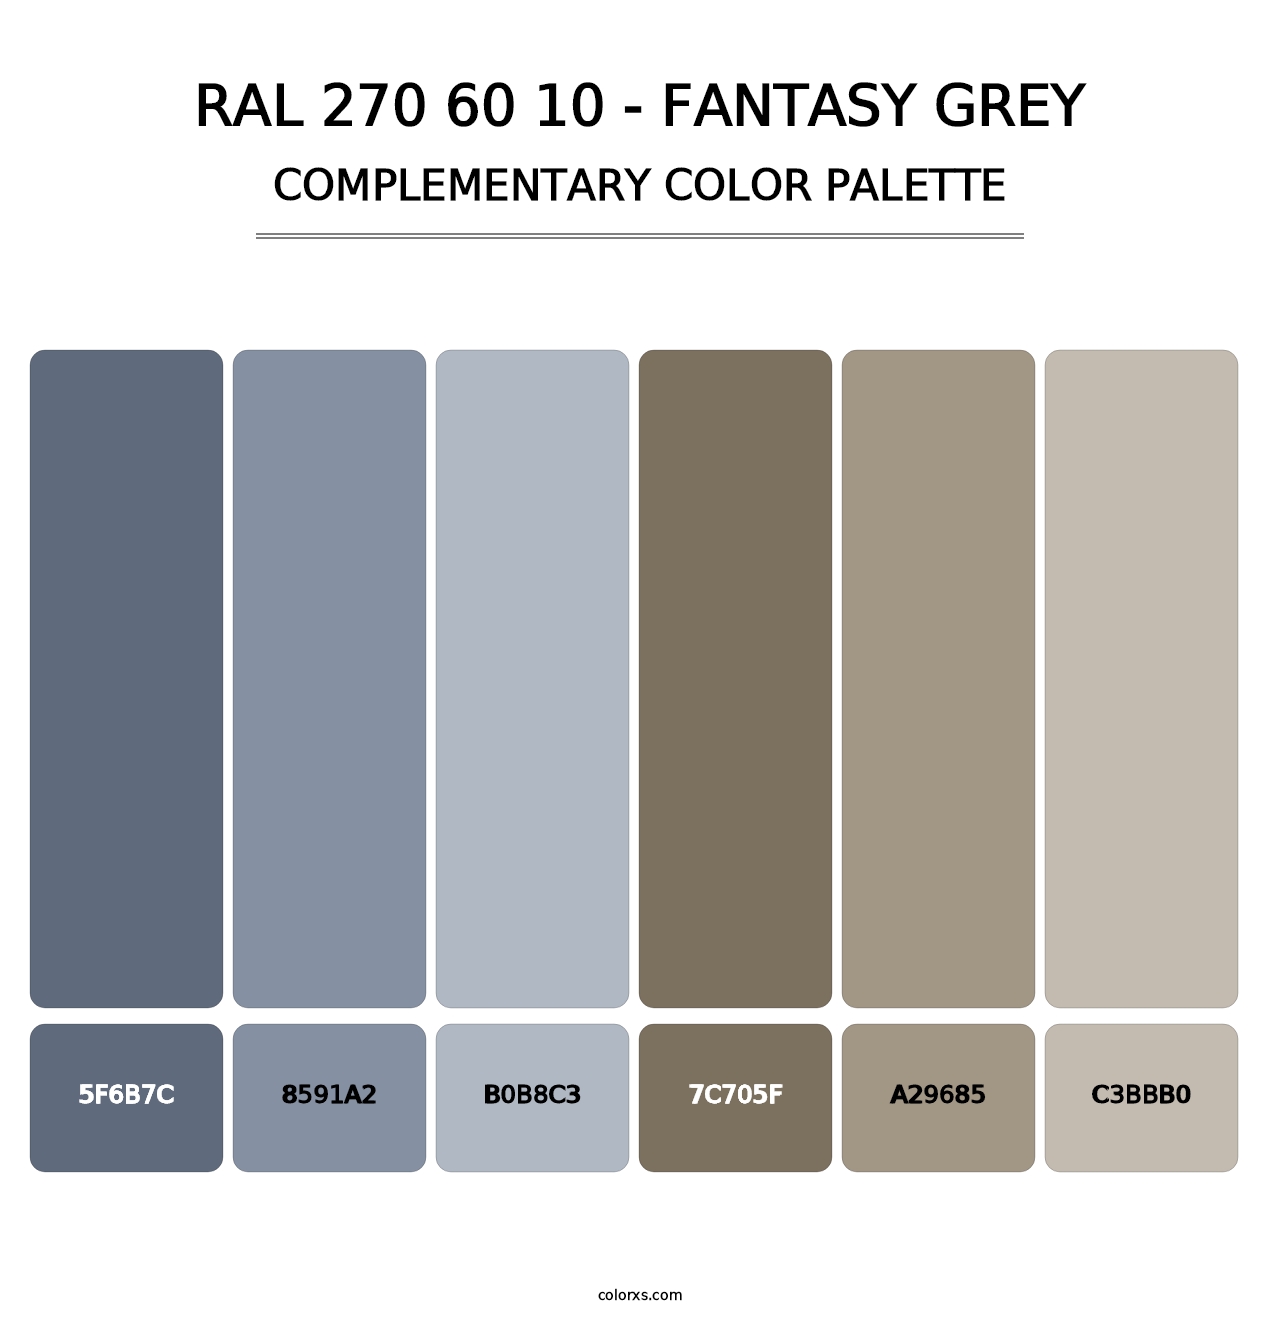 RAL 270 60 10 - Fantasy Grey - Complementary Color Palette